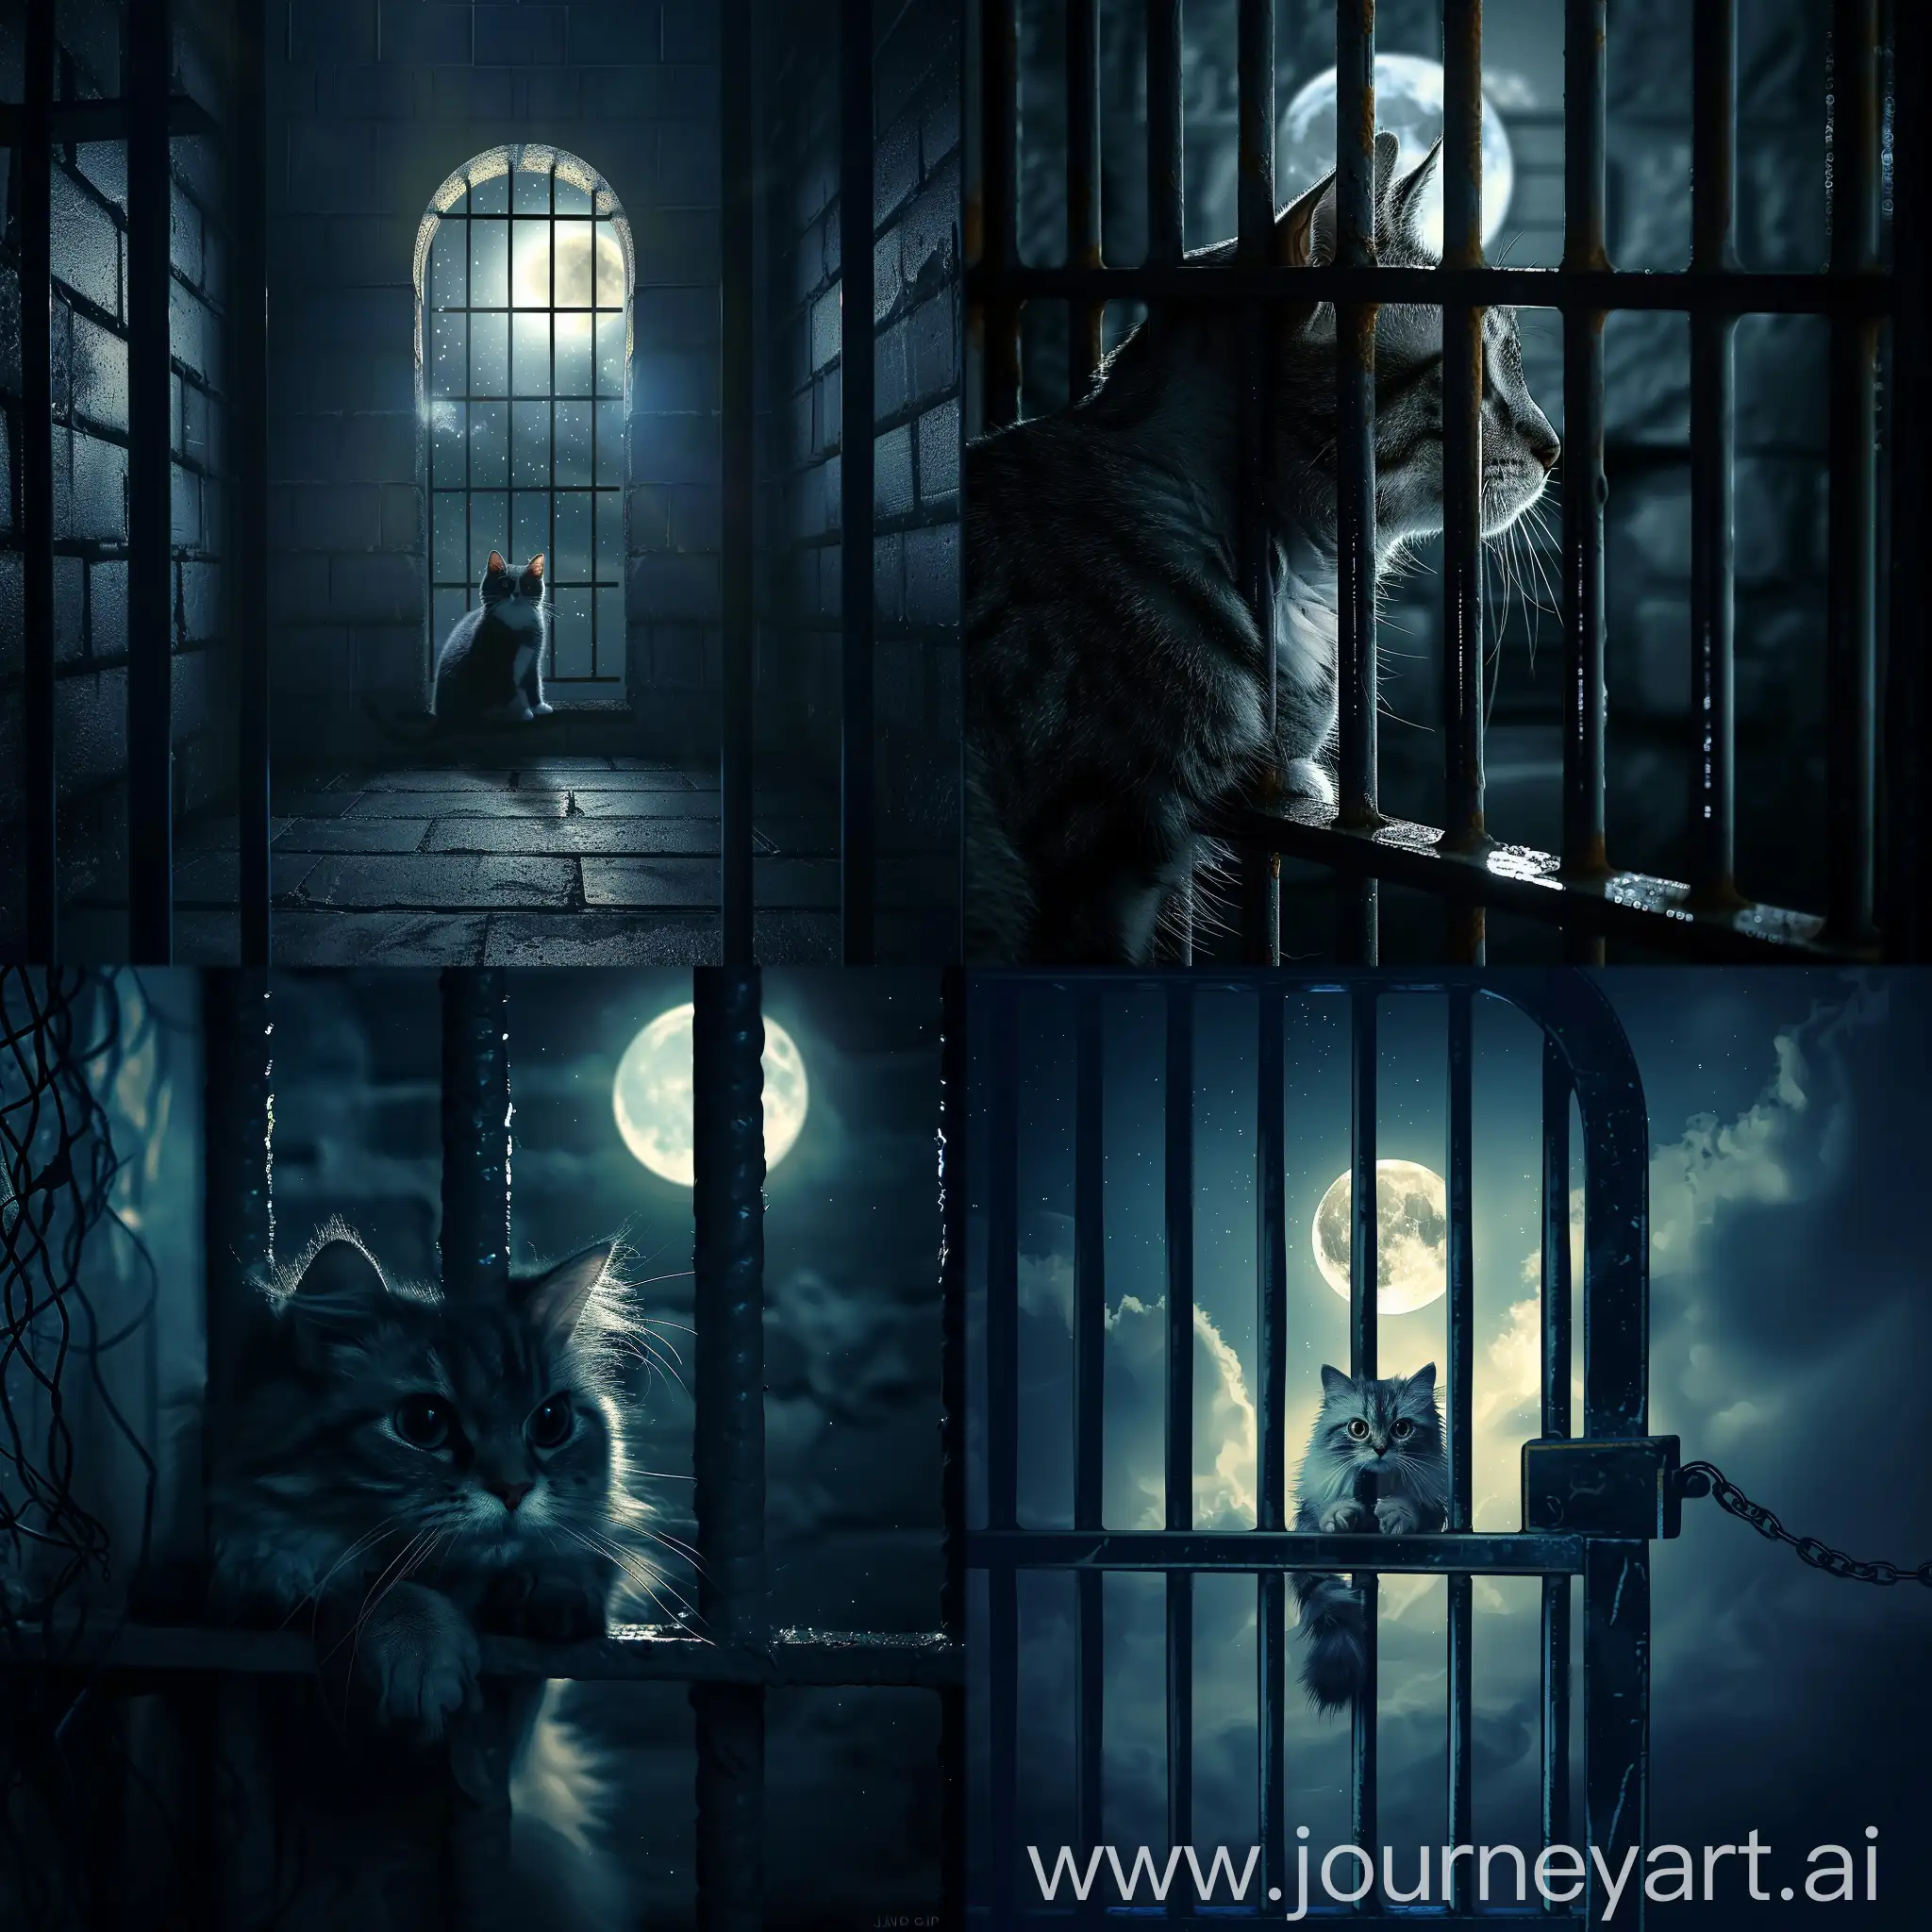 Moonlit-Night-in-a-Cozy-Cell-with-a-Playful-Cat